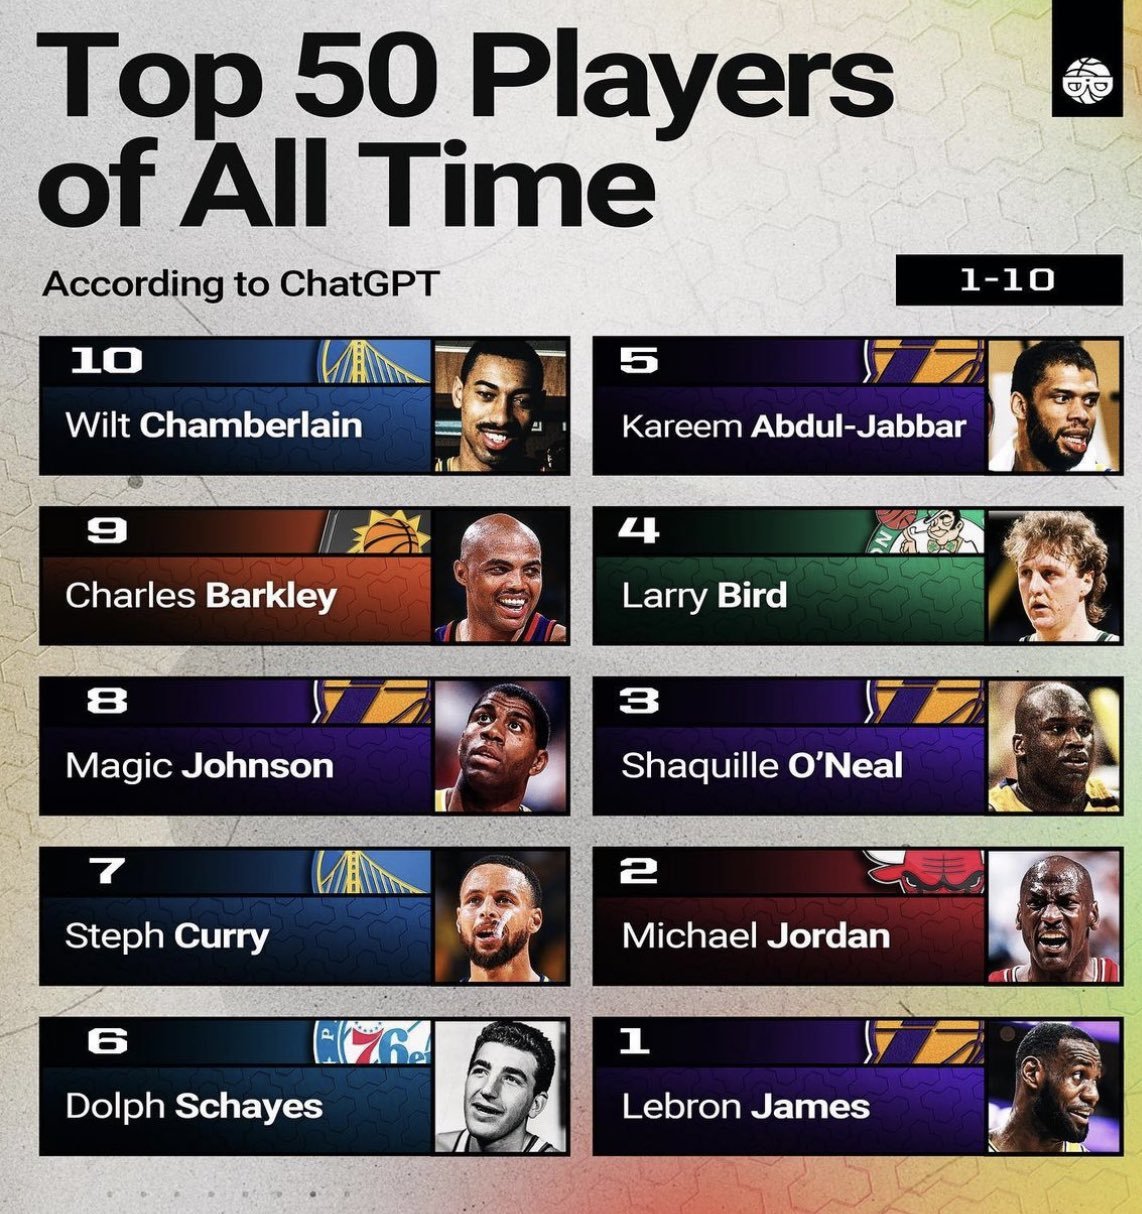 The top 25 all-time players in NBA history, according to ChatGPT